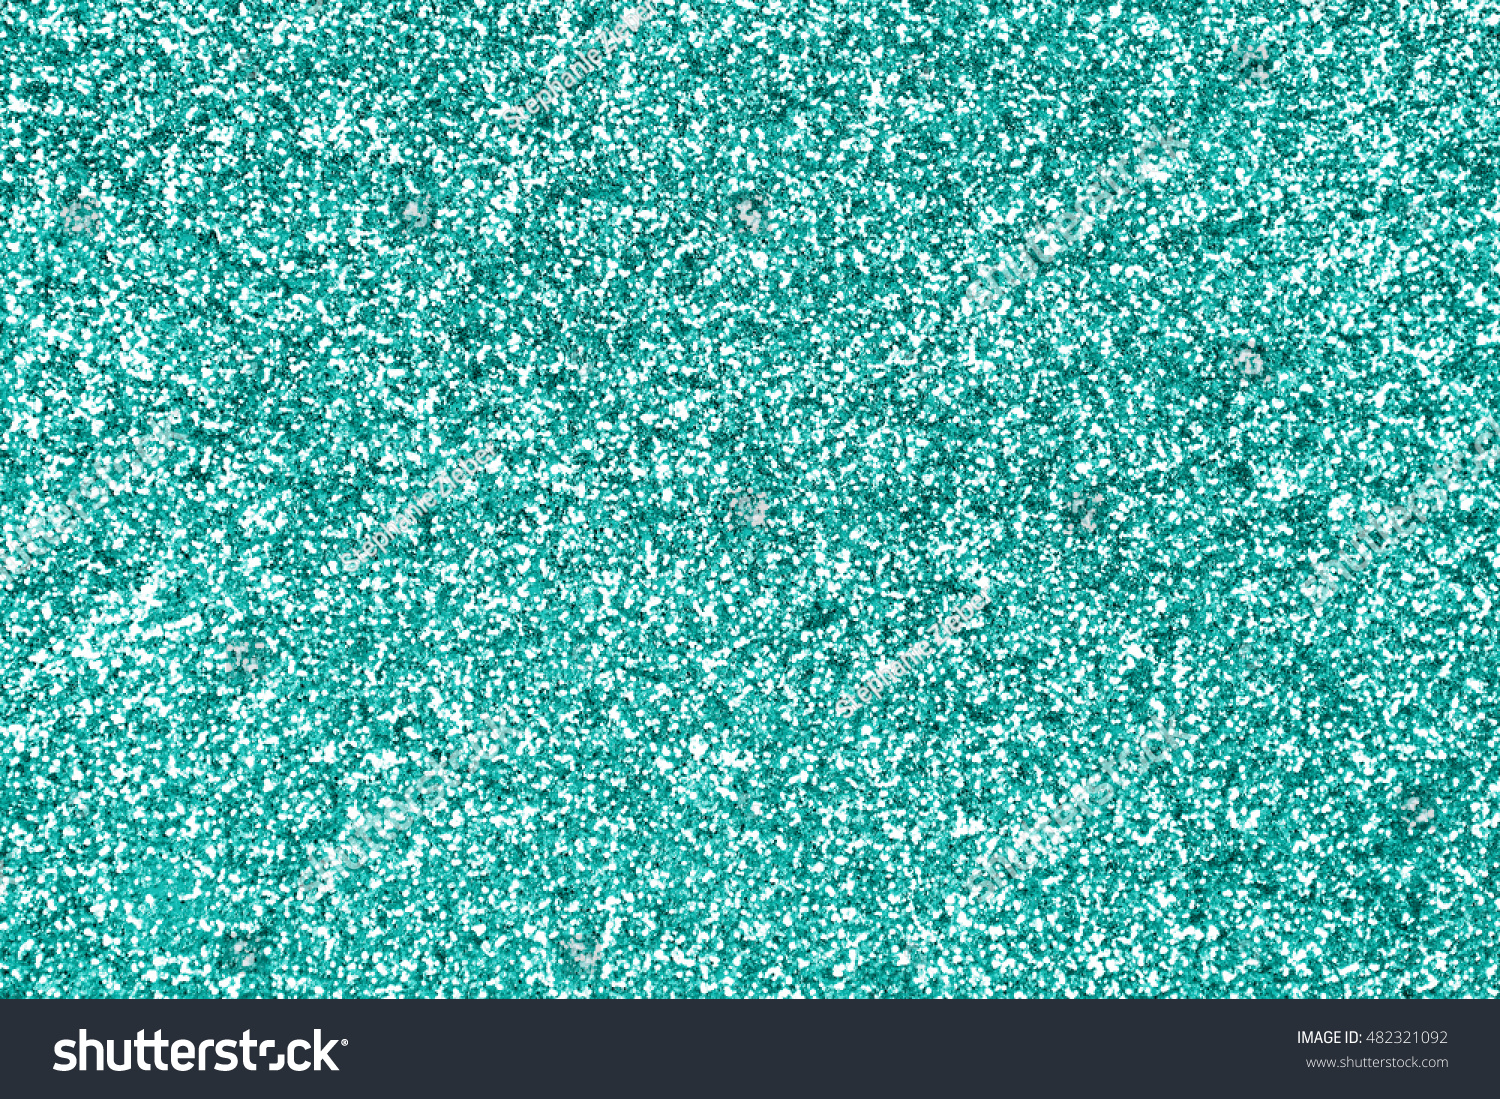 Teal green or turquoise and aqua glitter sparkle background texture or mint color party invite #482321092